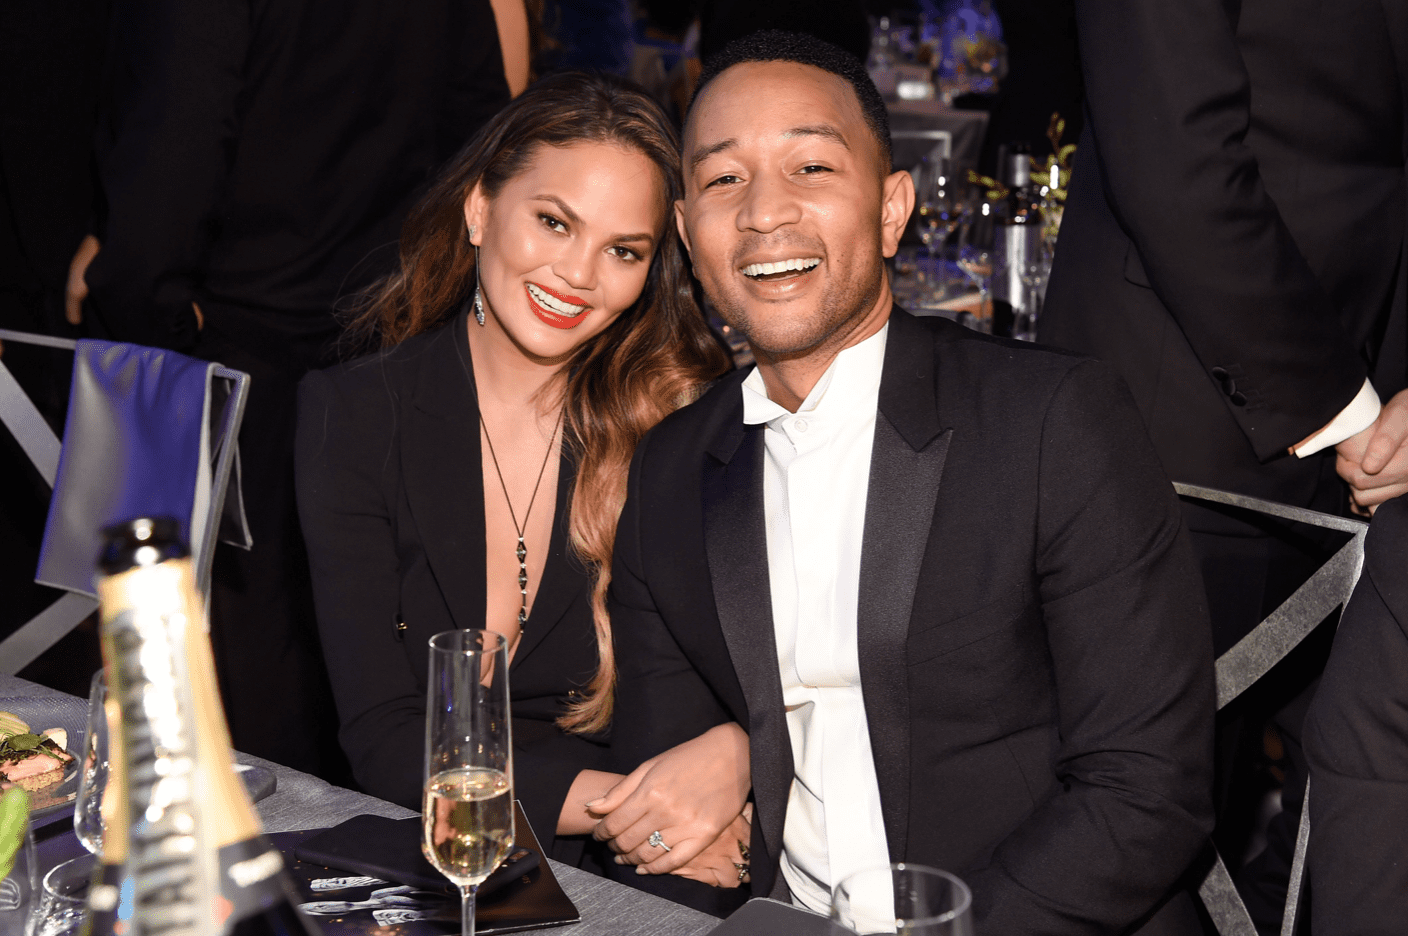 Chrissy Teigen and John Legend during the 23rd Annual Screen Actors Guild Awards on January 29, 2017 in Los Angeles, California. | Source: Getty Images